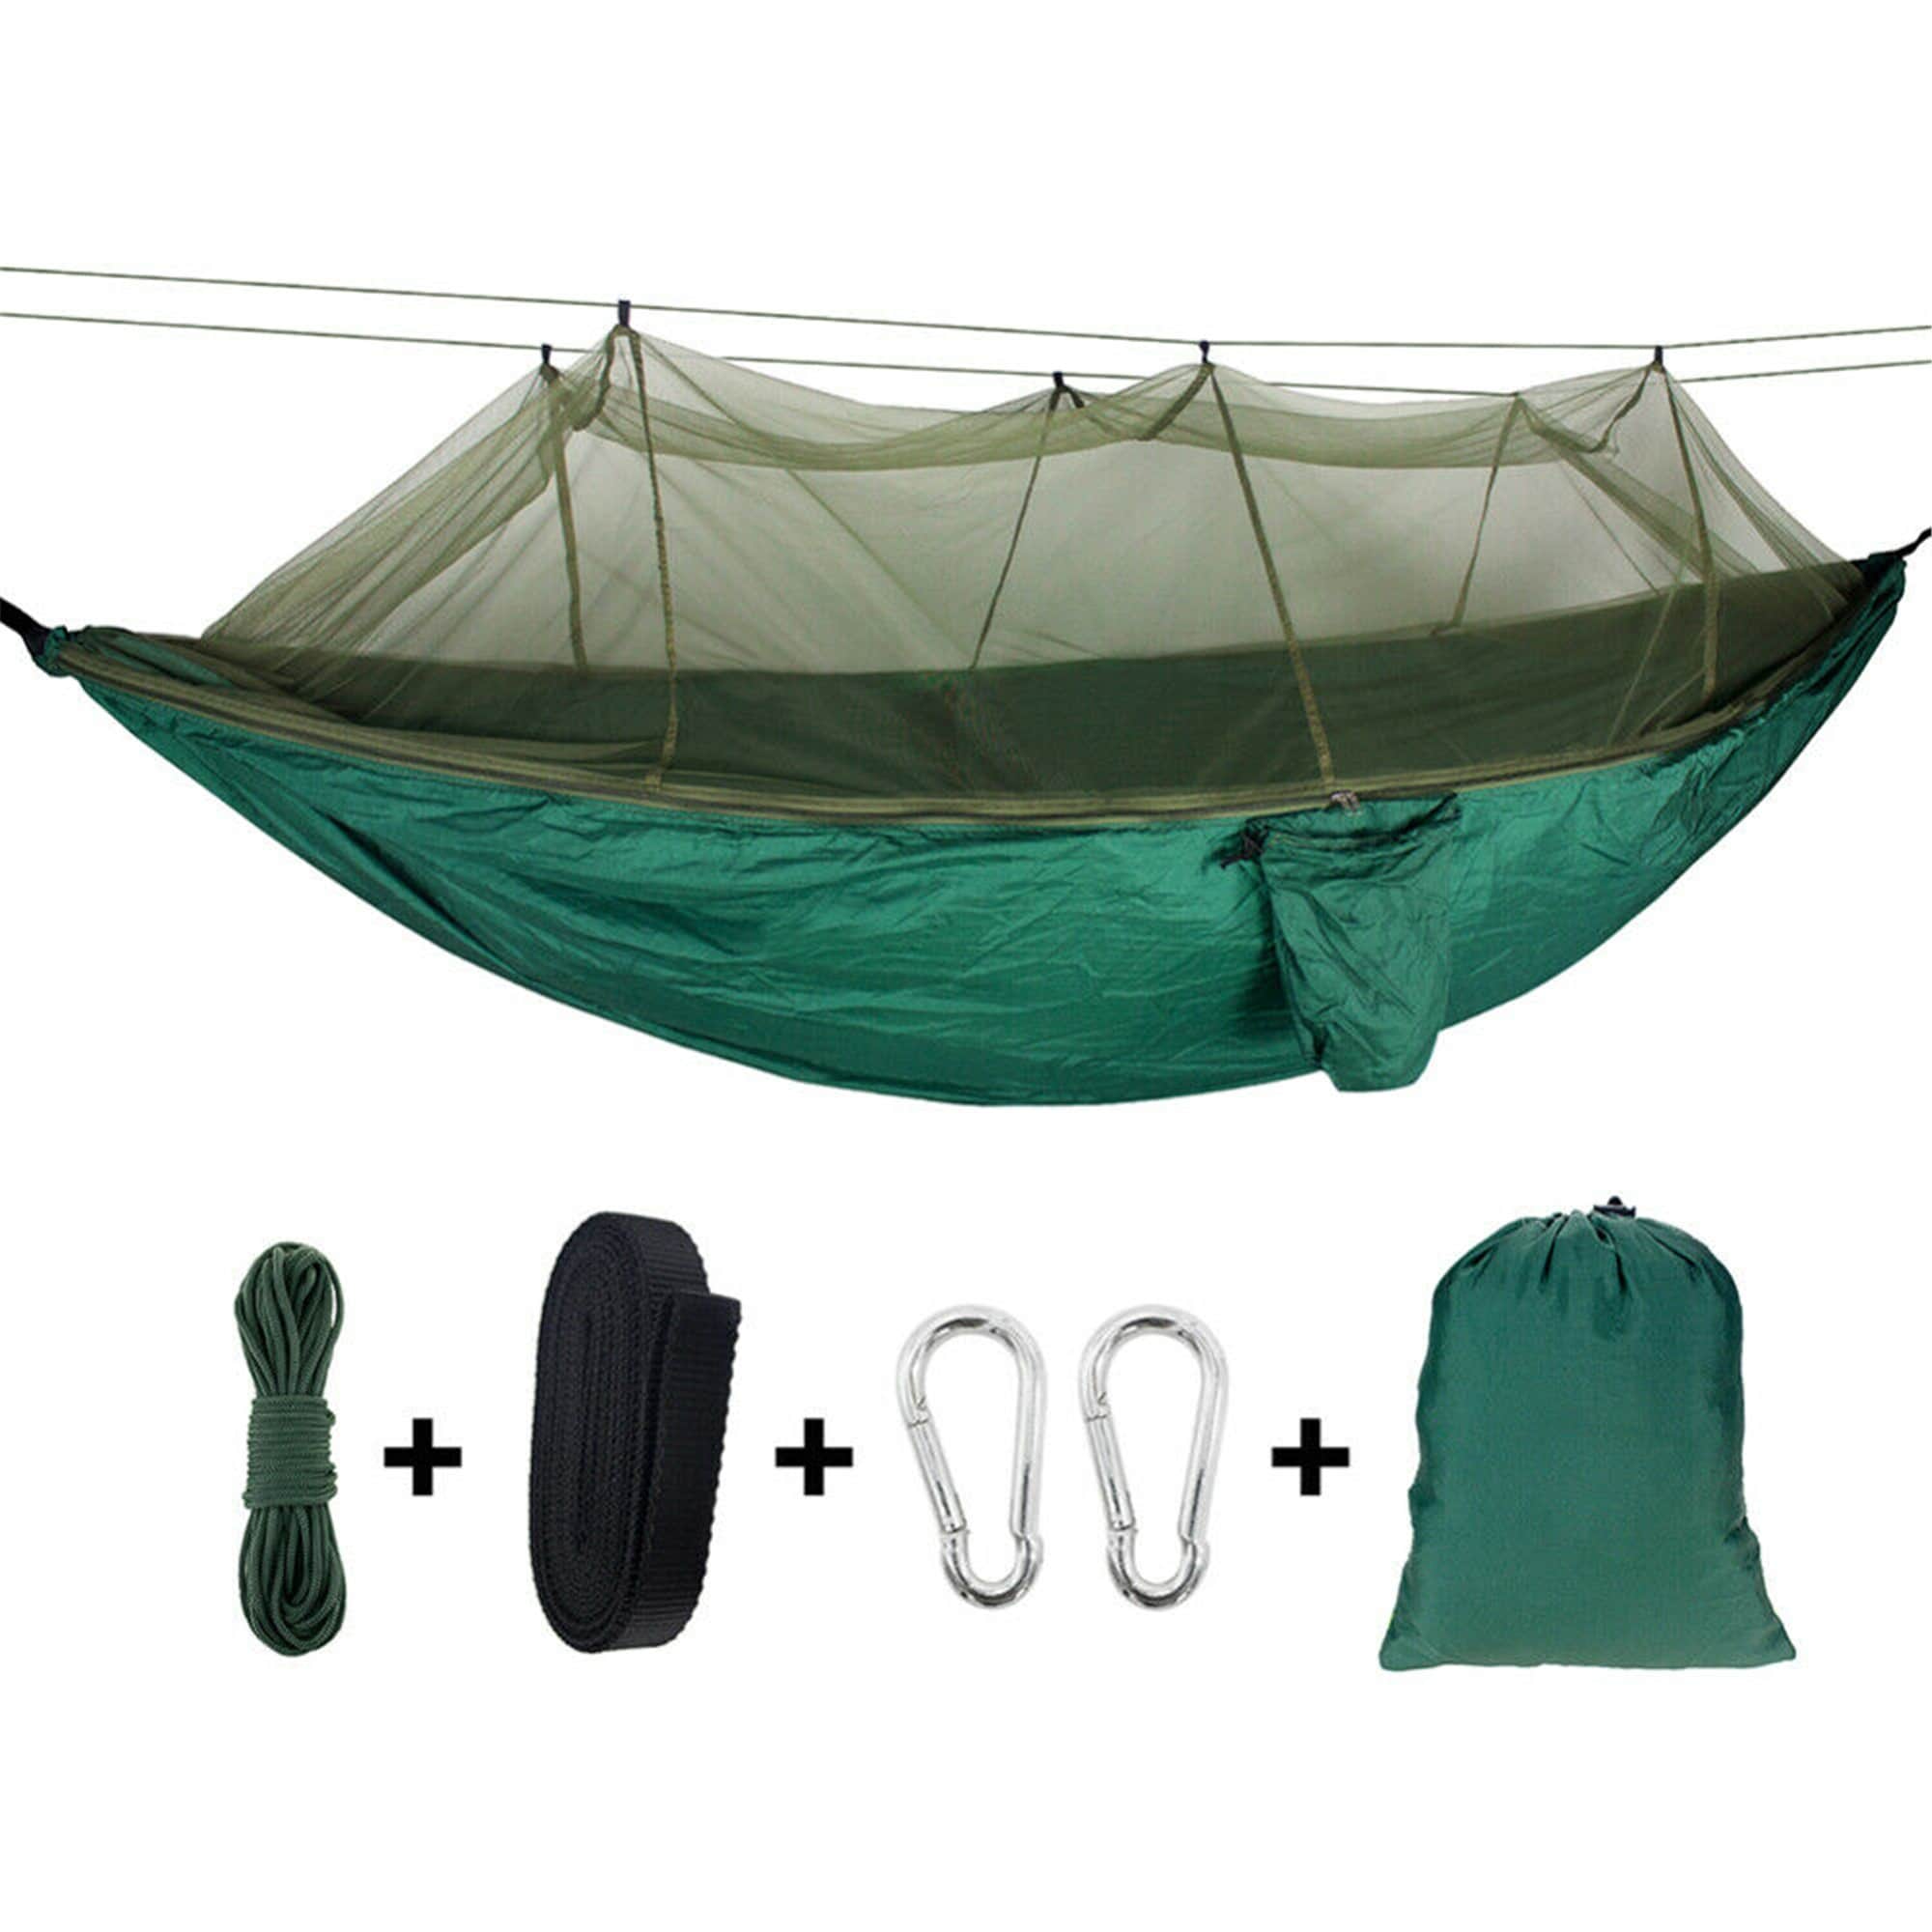 Outdoor 2 Person Camping Double Hammock With Mosquito Net Tent Hanging Bed Swing 